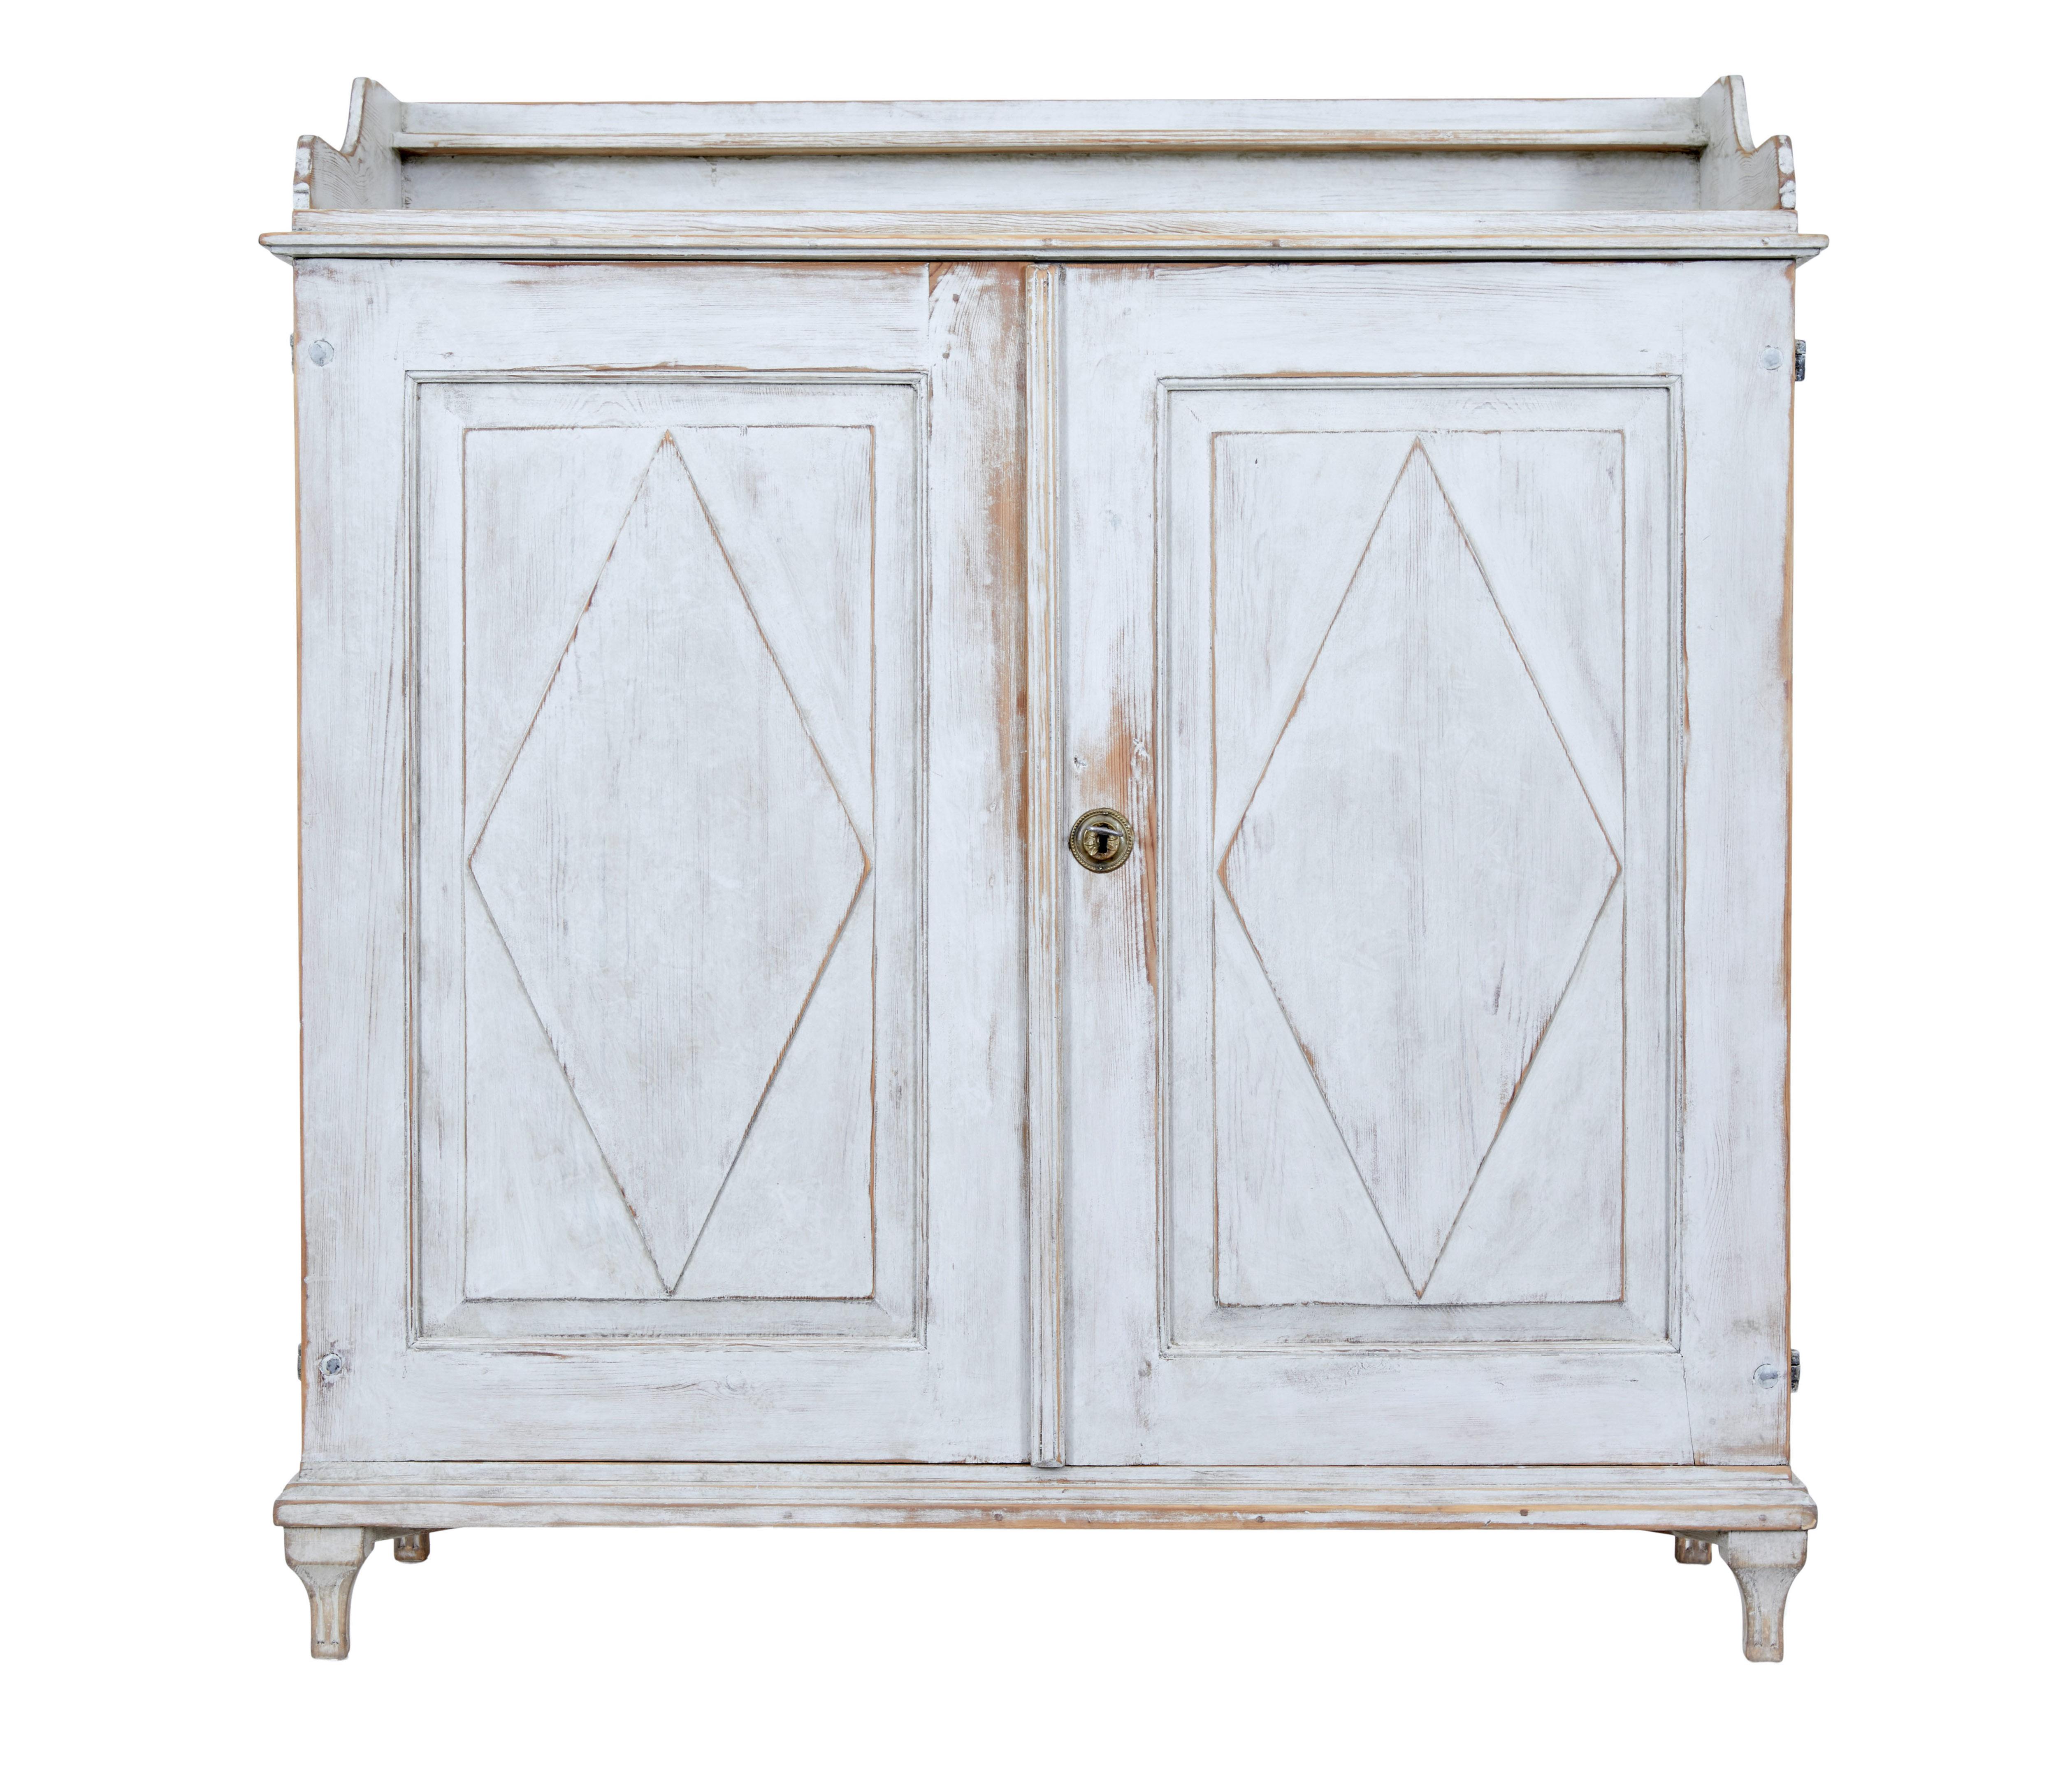 Swedish 19th century painted pine cupboard circa 1870.

Superb quality piece which would function well in multiple rooms such as a kitchen, bedroom or linen room. This piece would sit well in a modern or traditional interior.

Made in generous